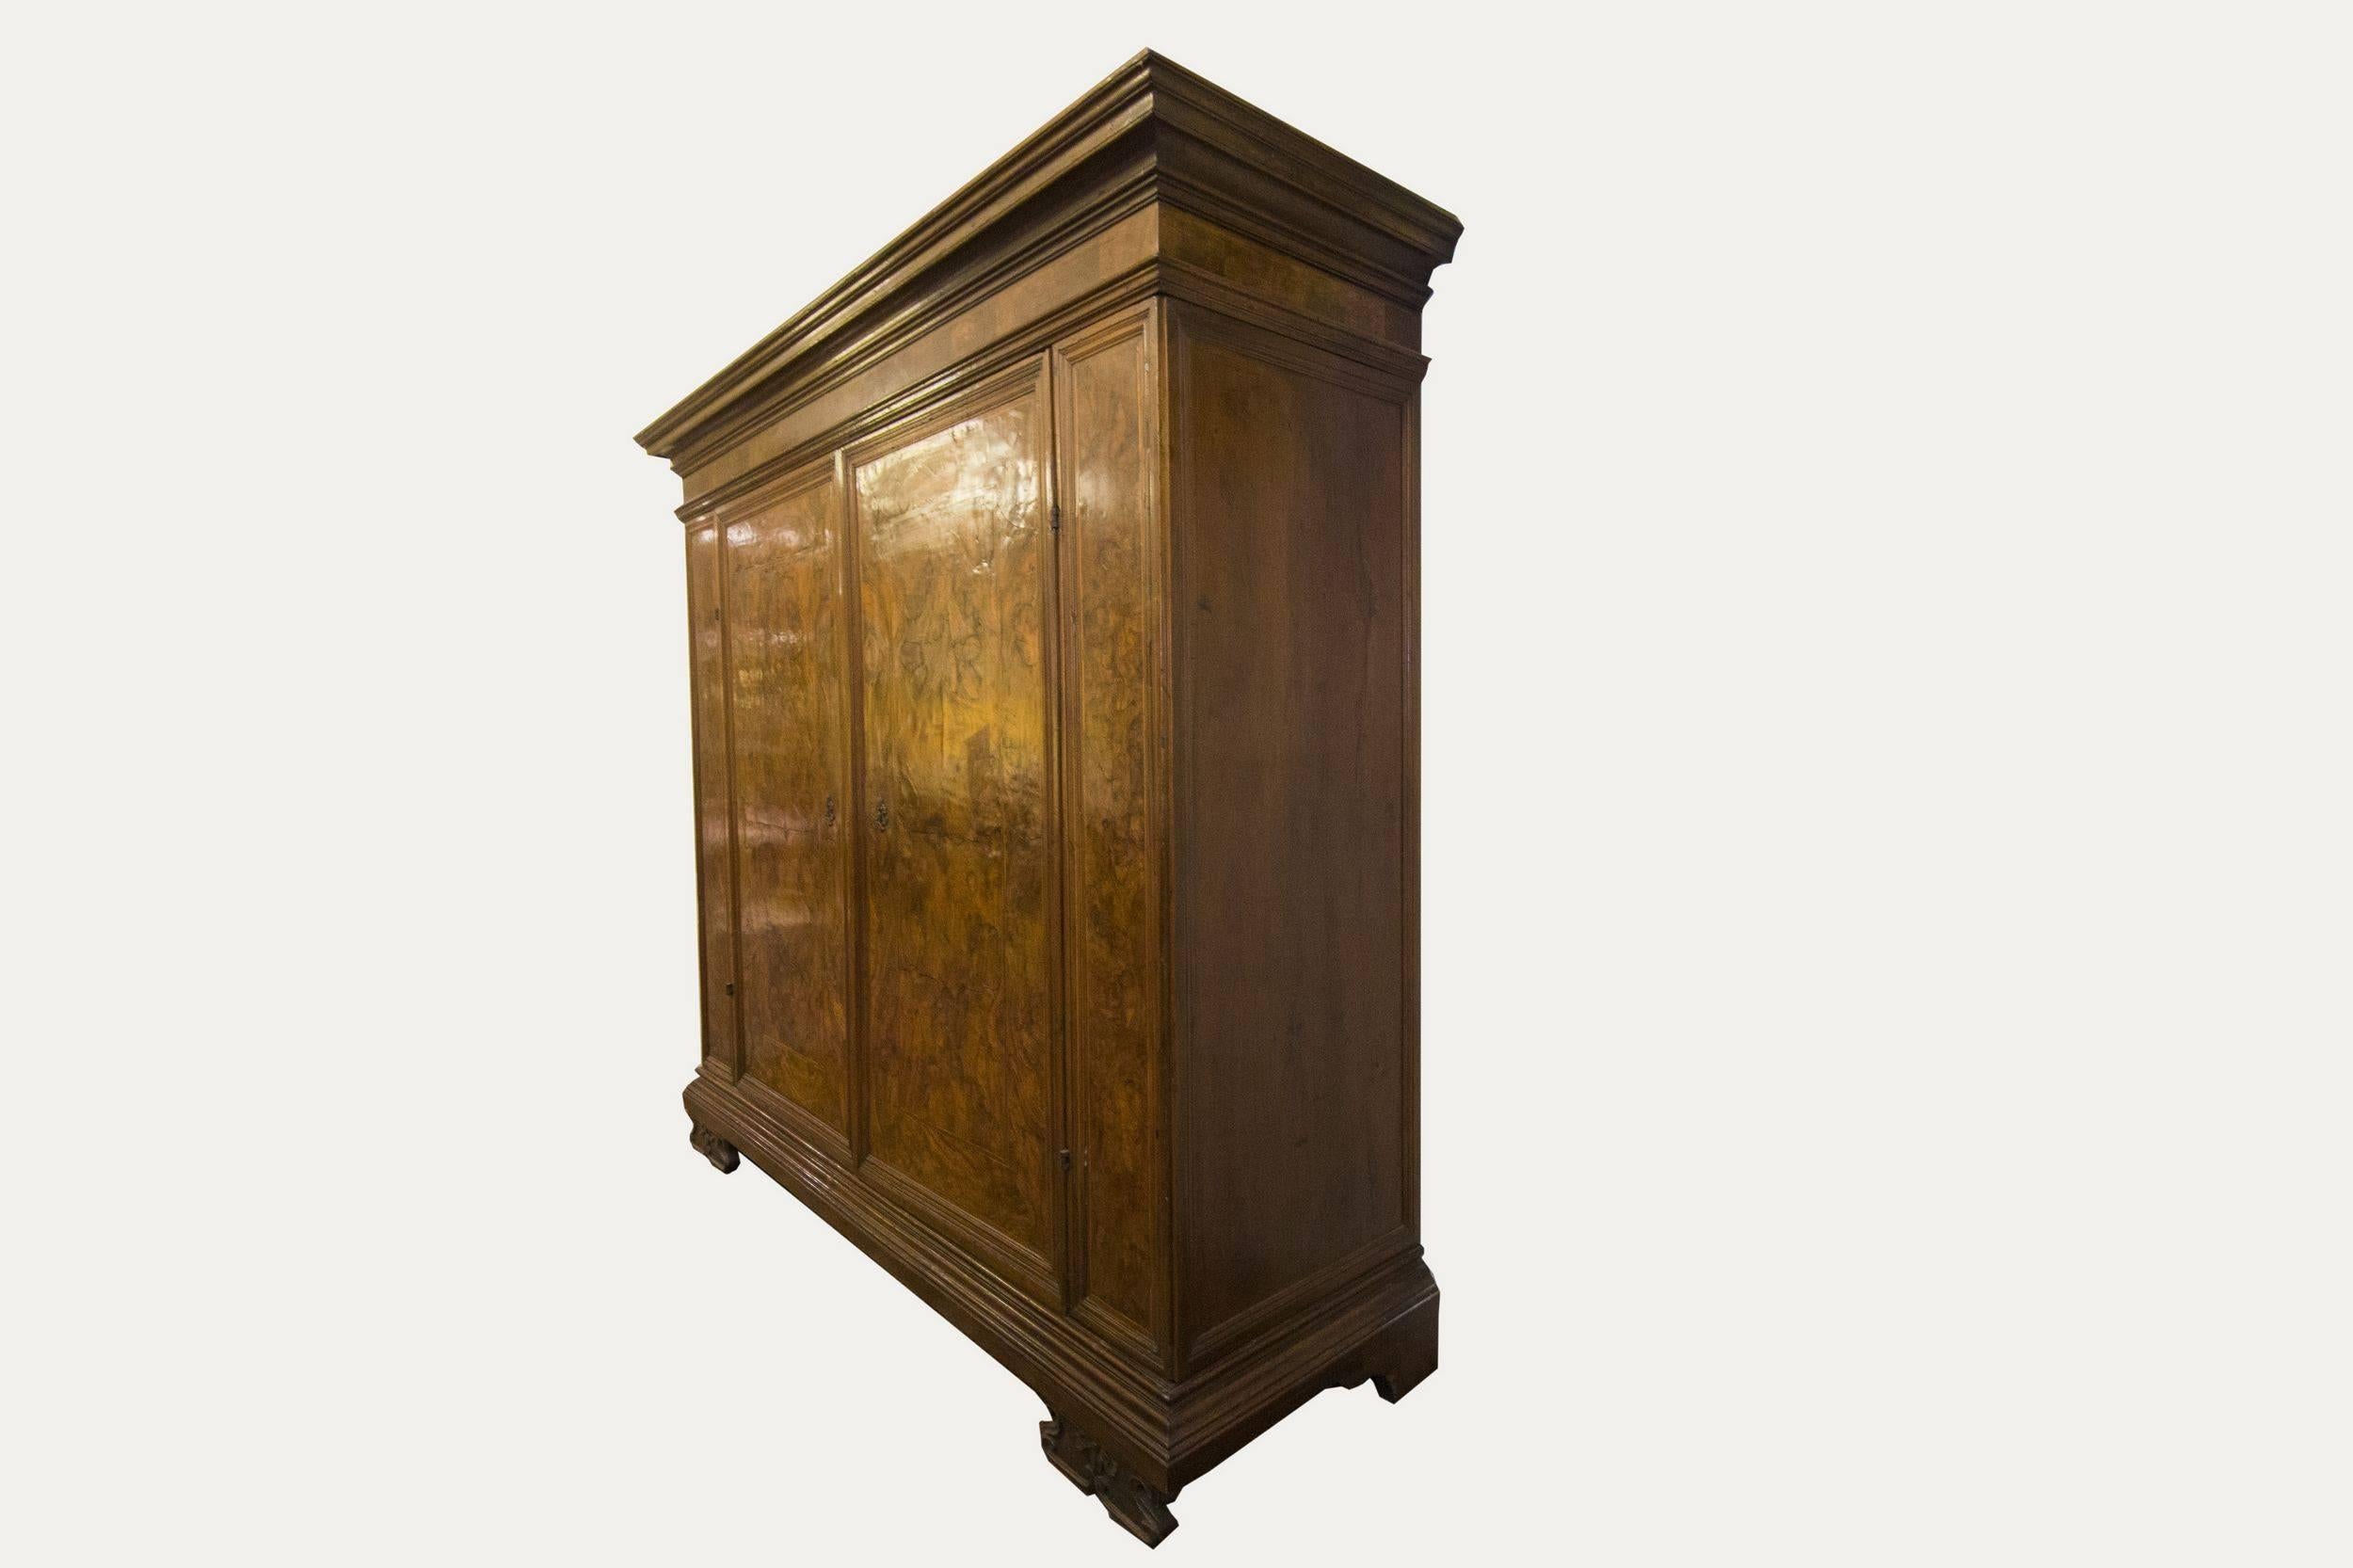 Magnificent Venetian wardrobe from the mid-18th century in walnut, front veneered in burr walnut with simple inlays in lighter wood thread.
Frontal carved feet.
Internal arrangement with a shelf and predisposition for the clothes rack.